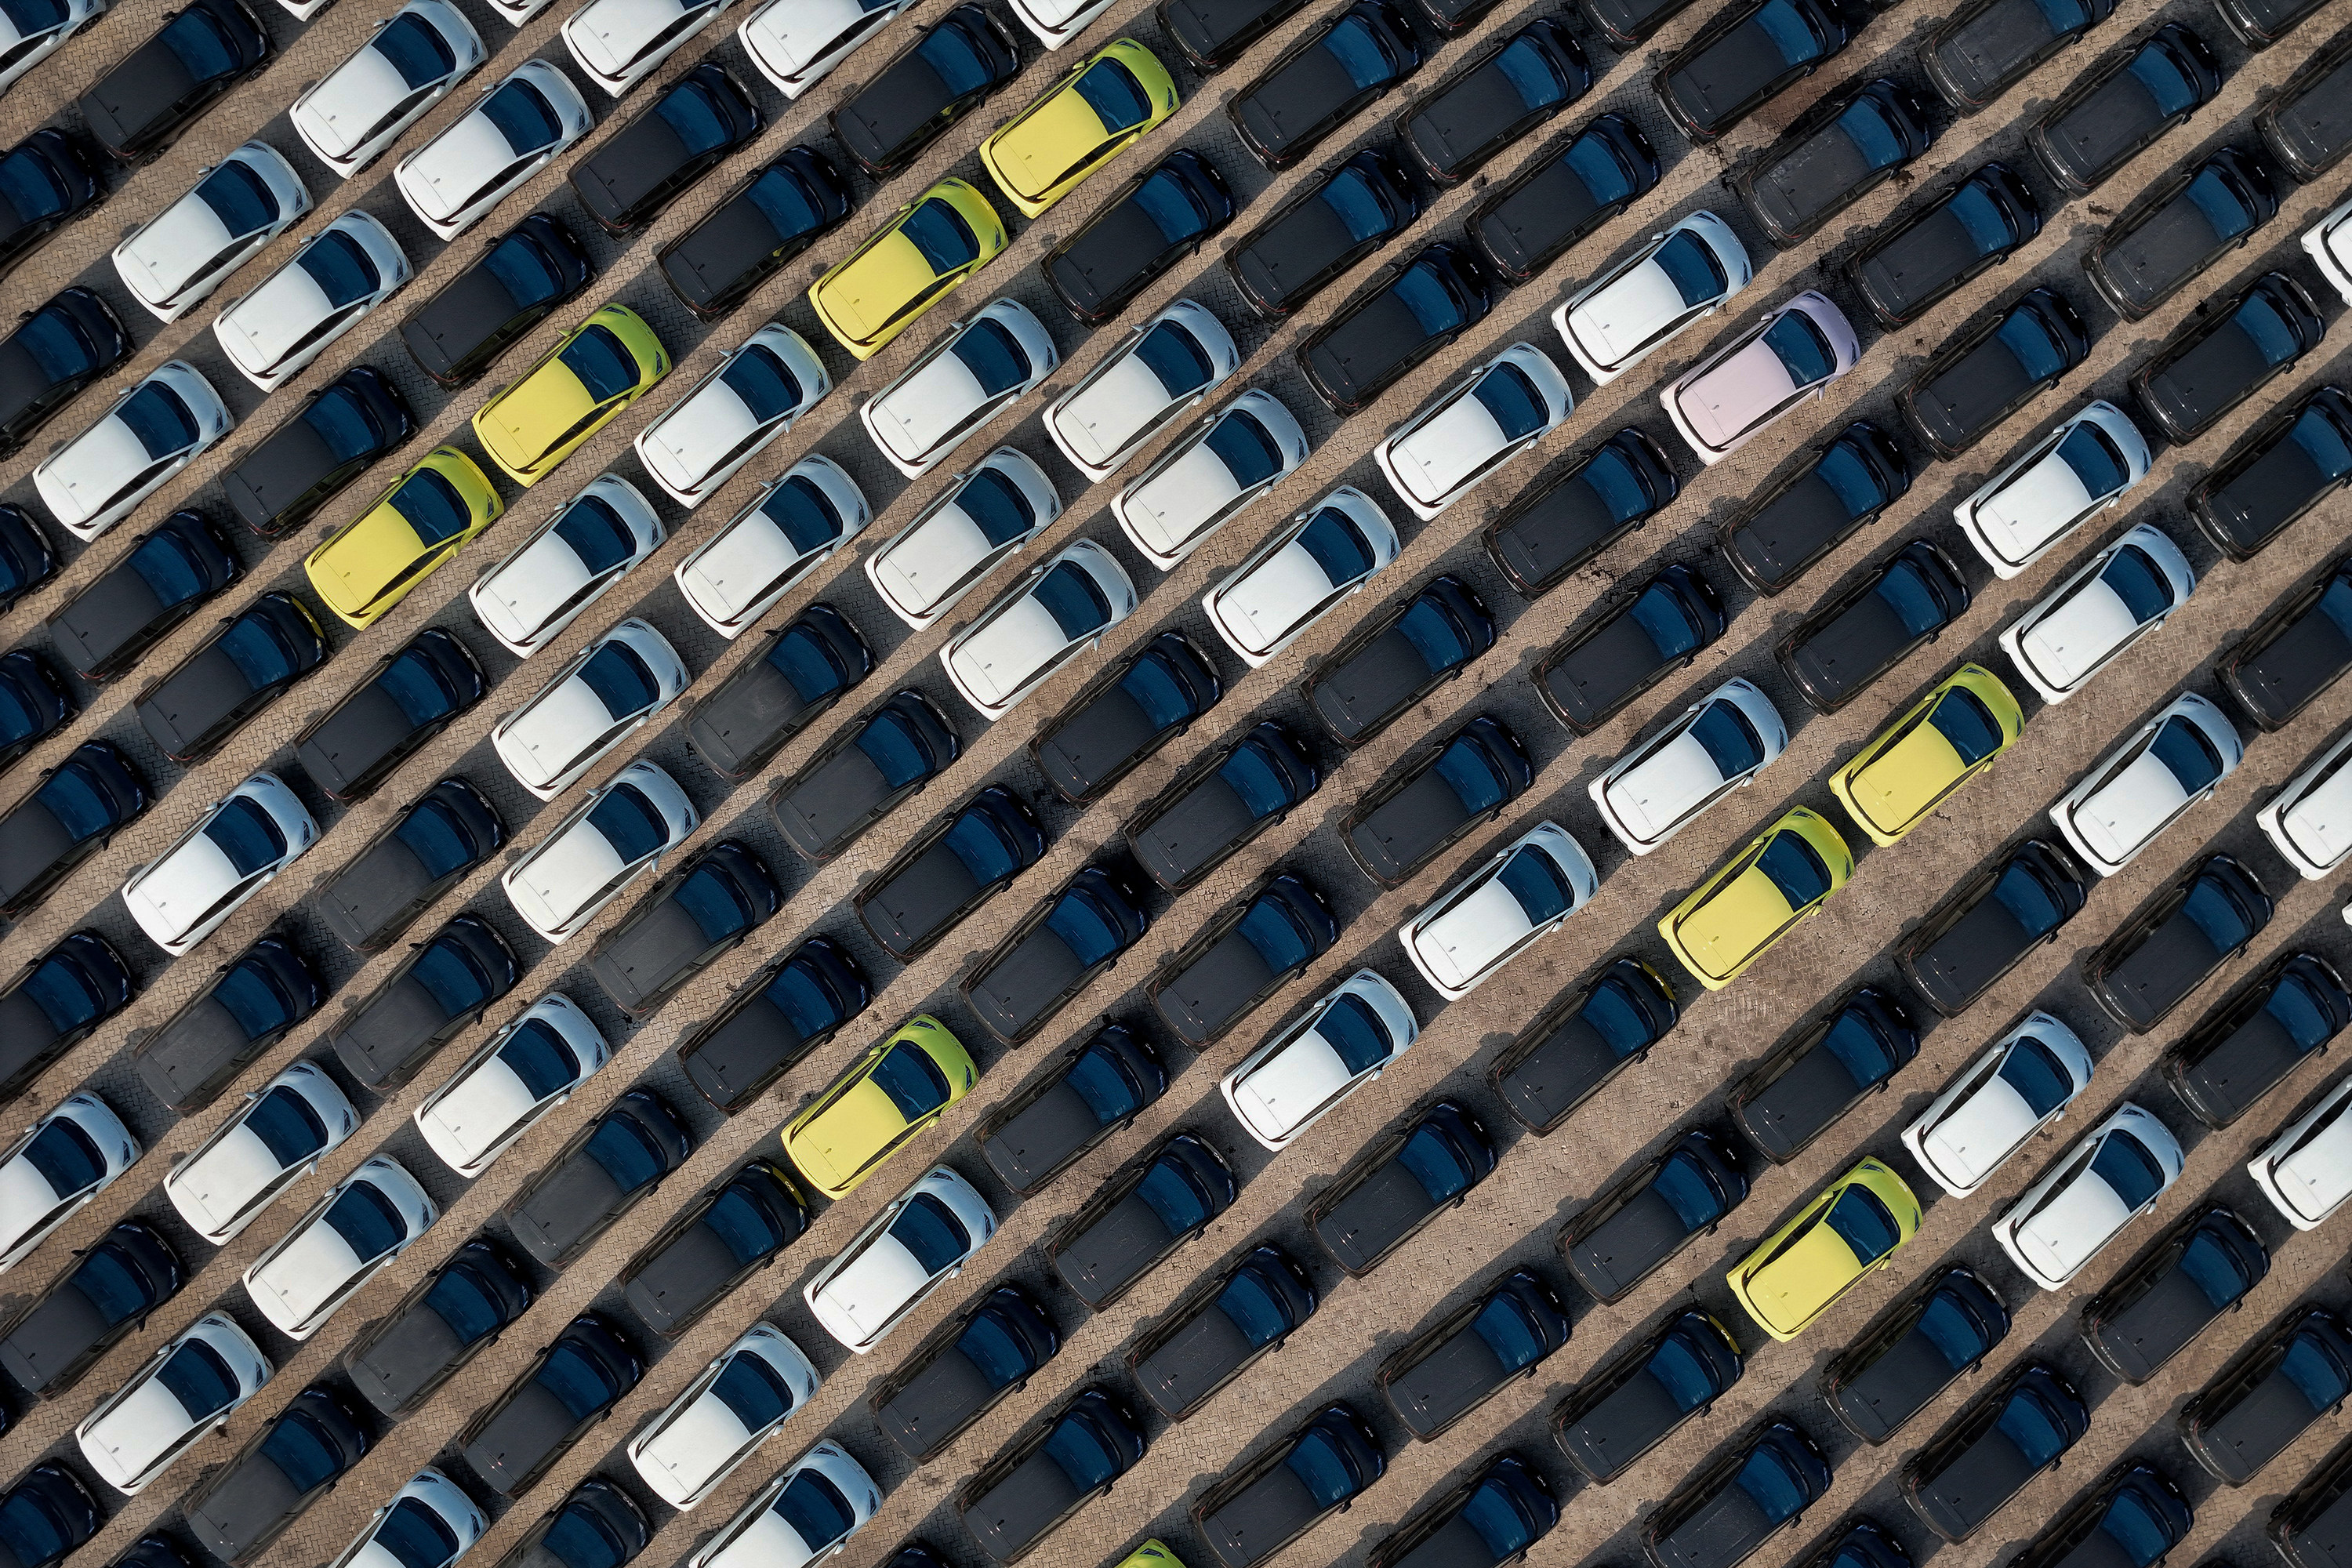 BYD electric cars wait to be loaded onto a ship for export in Yantai, China’s Shandong province. Photo: STR/AFP/Getty Images/TNS